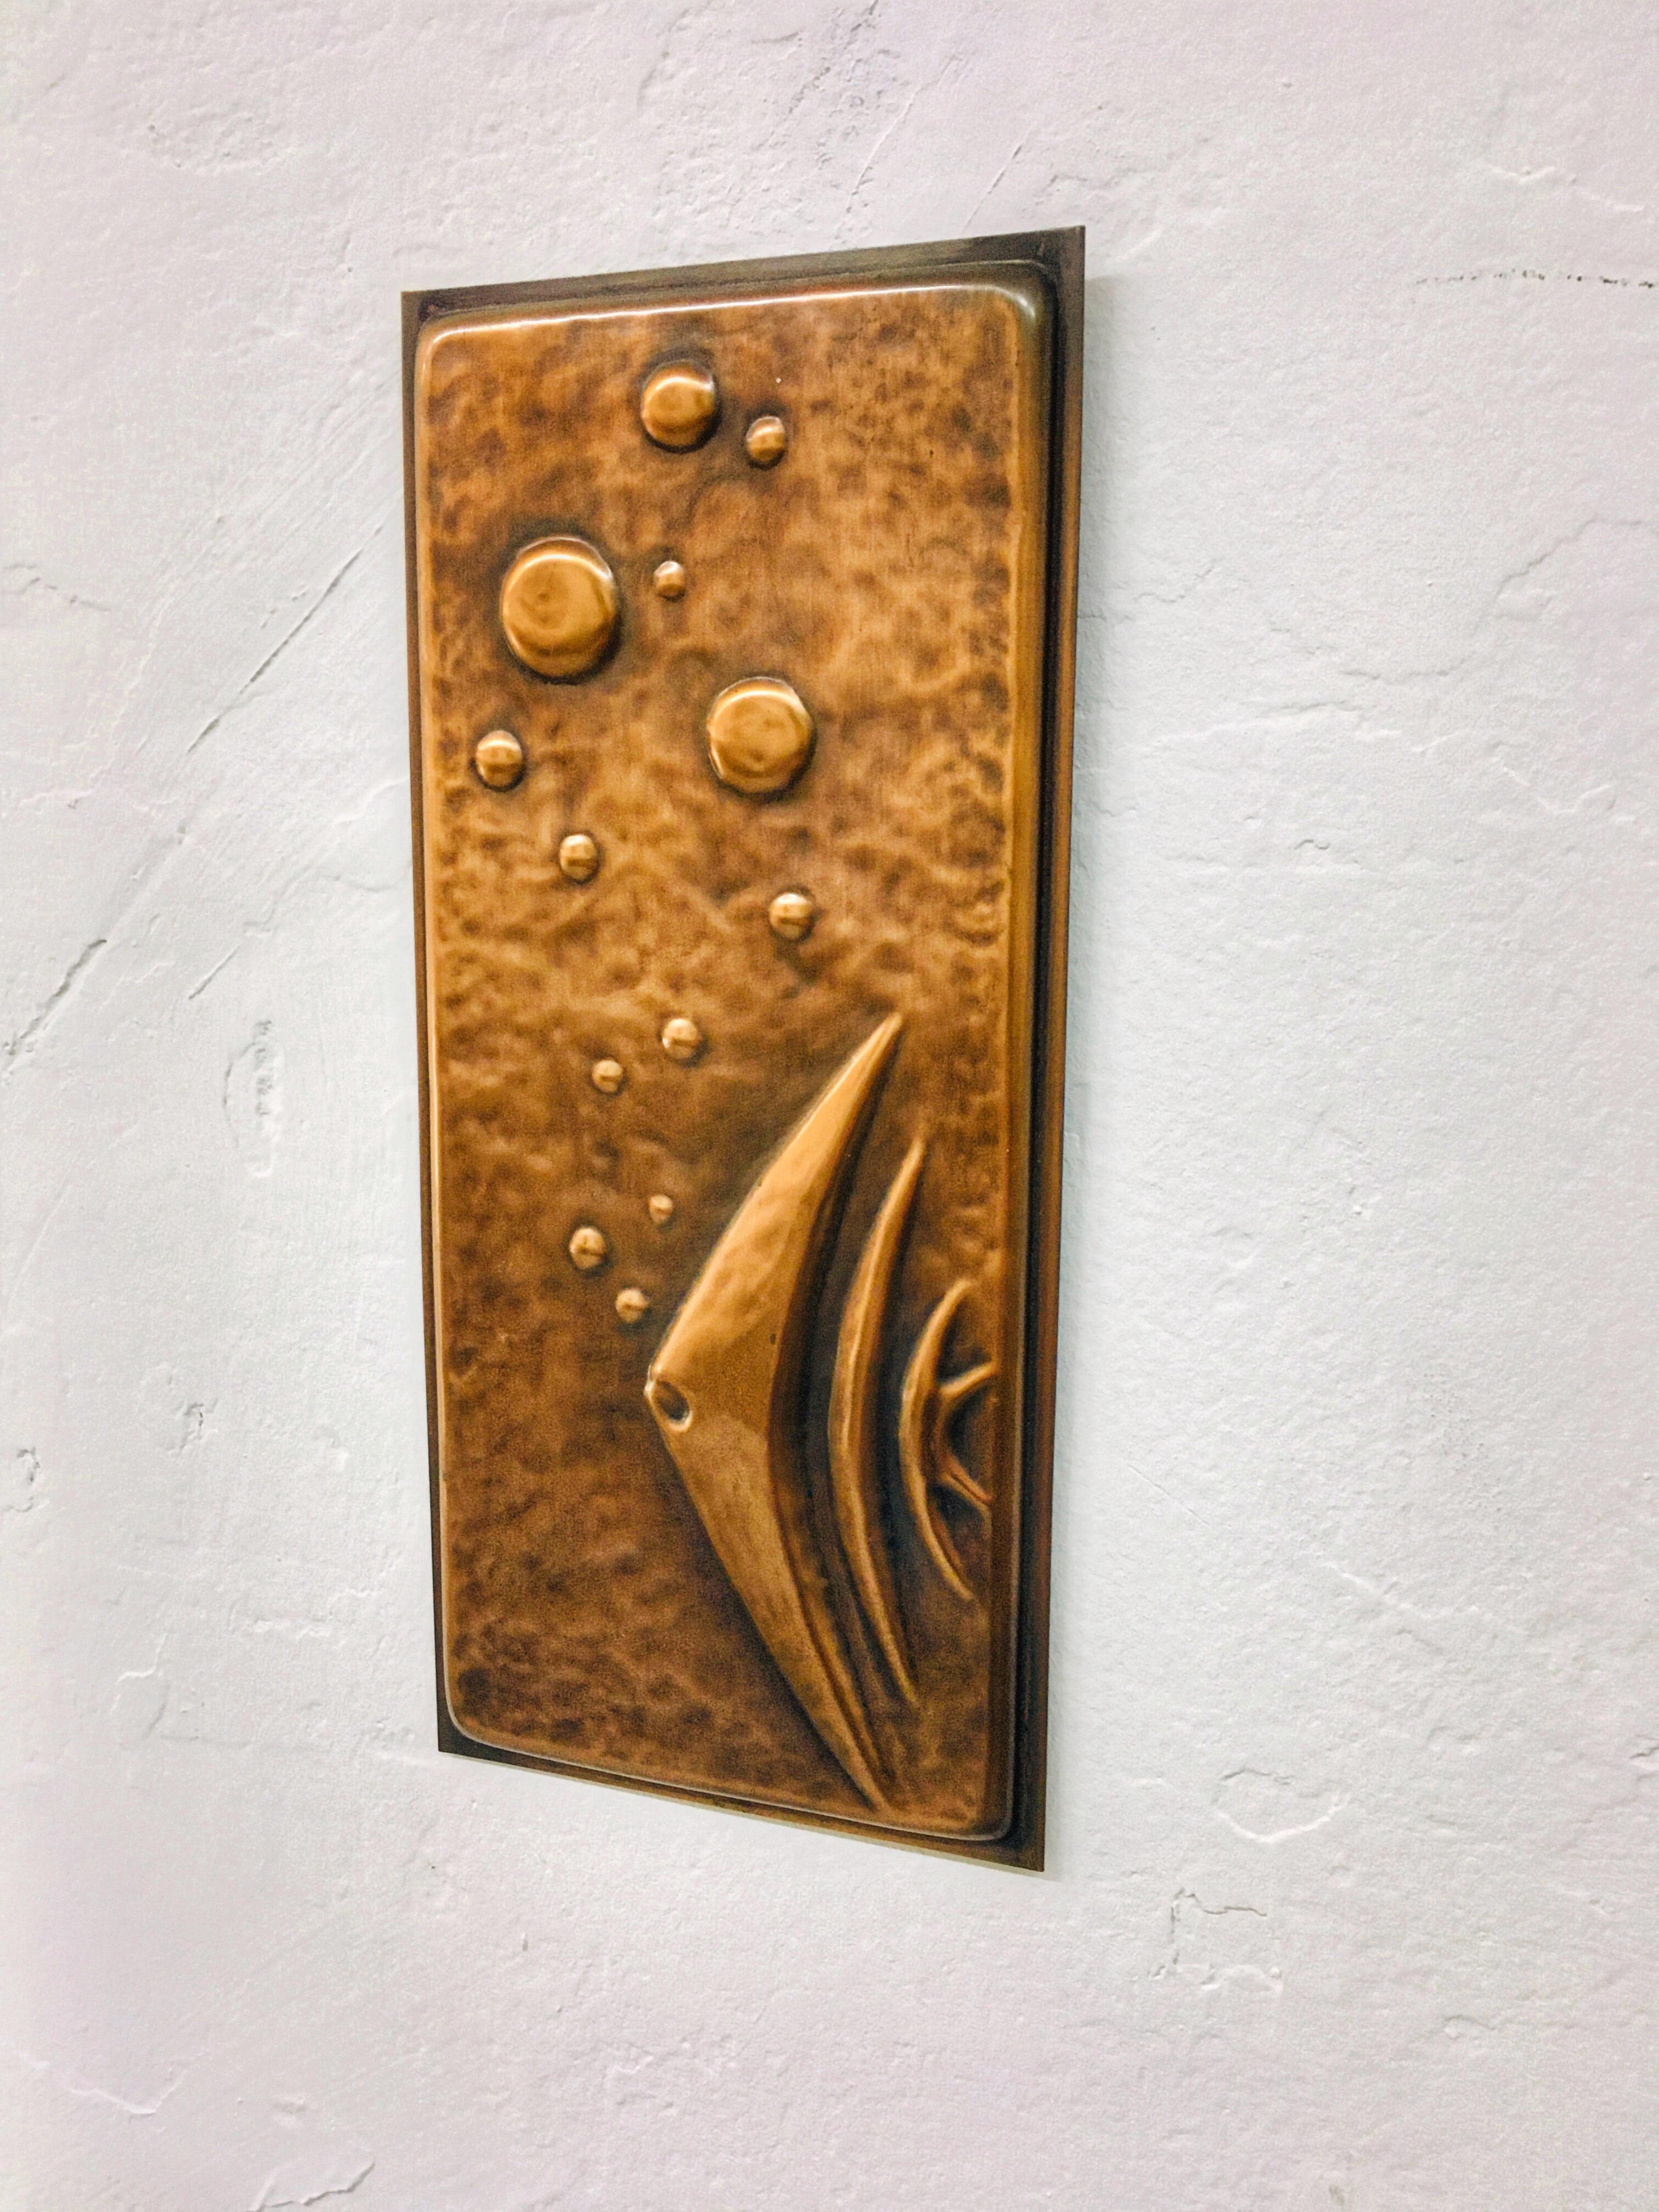 Unique relief wall art made of copper with a sailfish blowing bubbles. Minimalist design from the 1960s. It looks very decorative when placed with other mid-century elements. It is available in good condition, some stains are possible on the